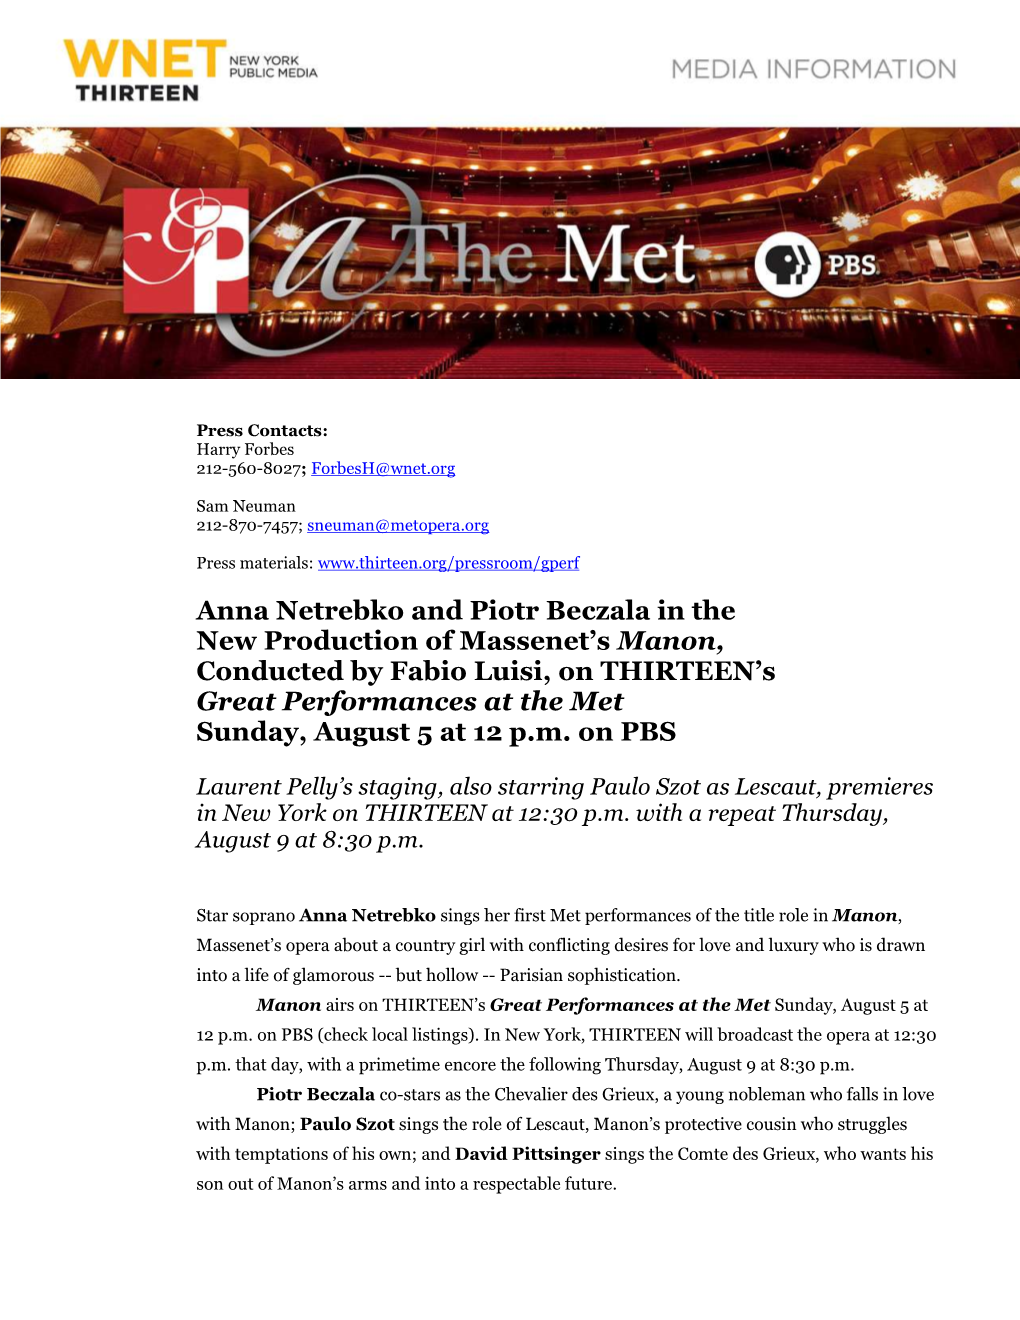 Manon, Conducted by Fabio Luisi, on THIRTEEN’S Great Performances at the Met Sunday, August 5 at 12 P.M